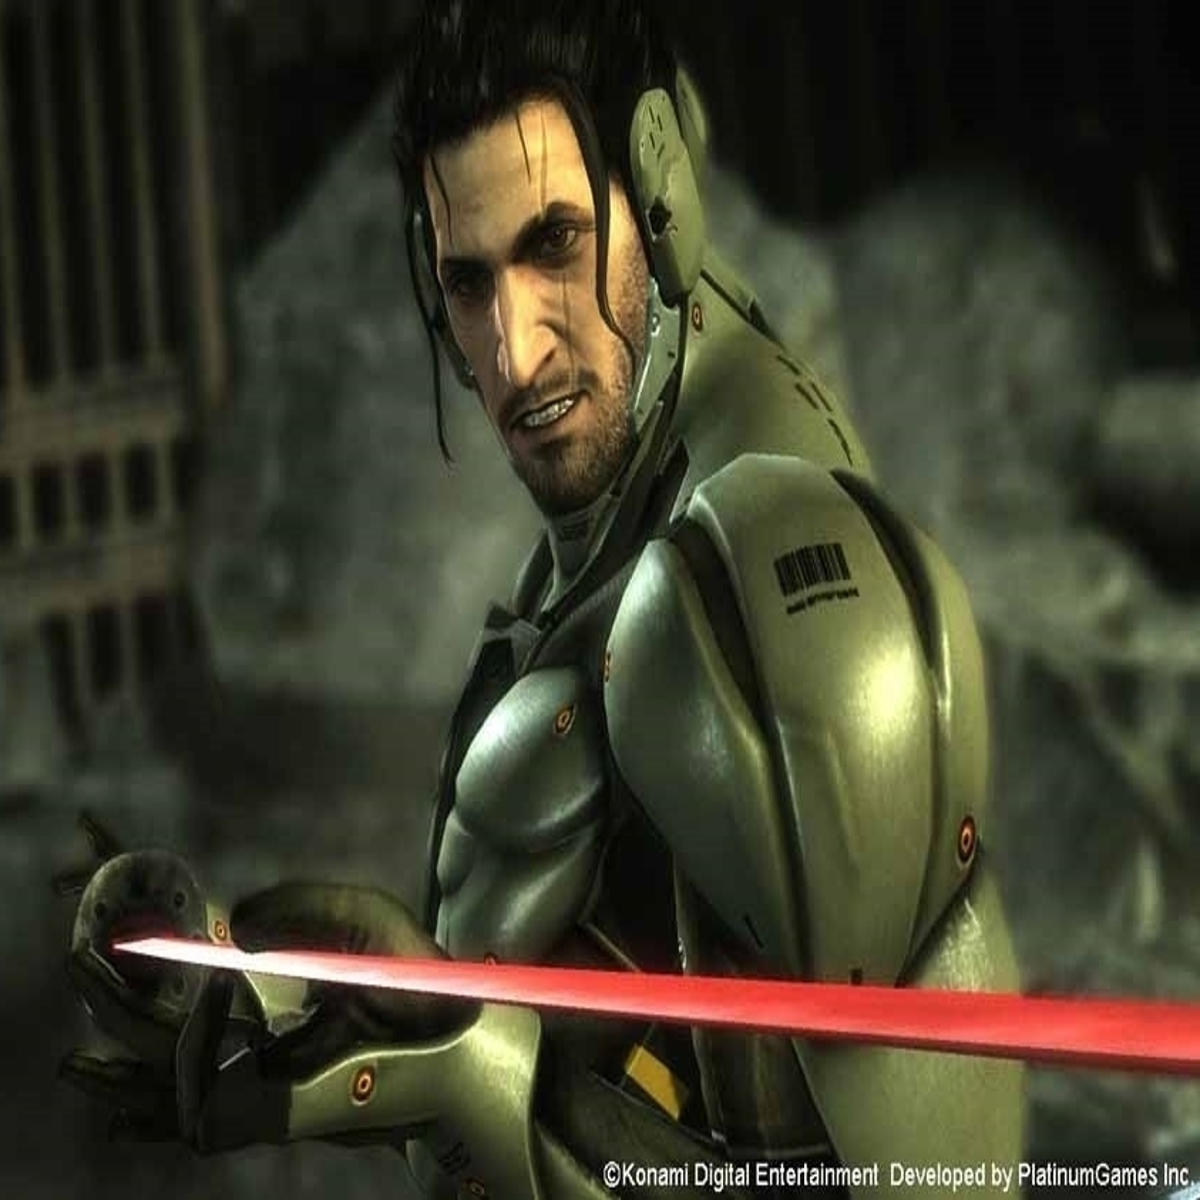 Metal Gear Rising: Revengeance to feature DLC for Metal Gear Solid